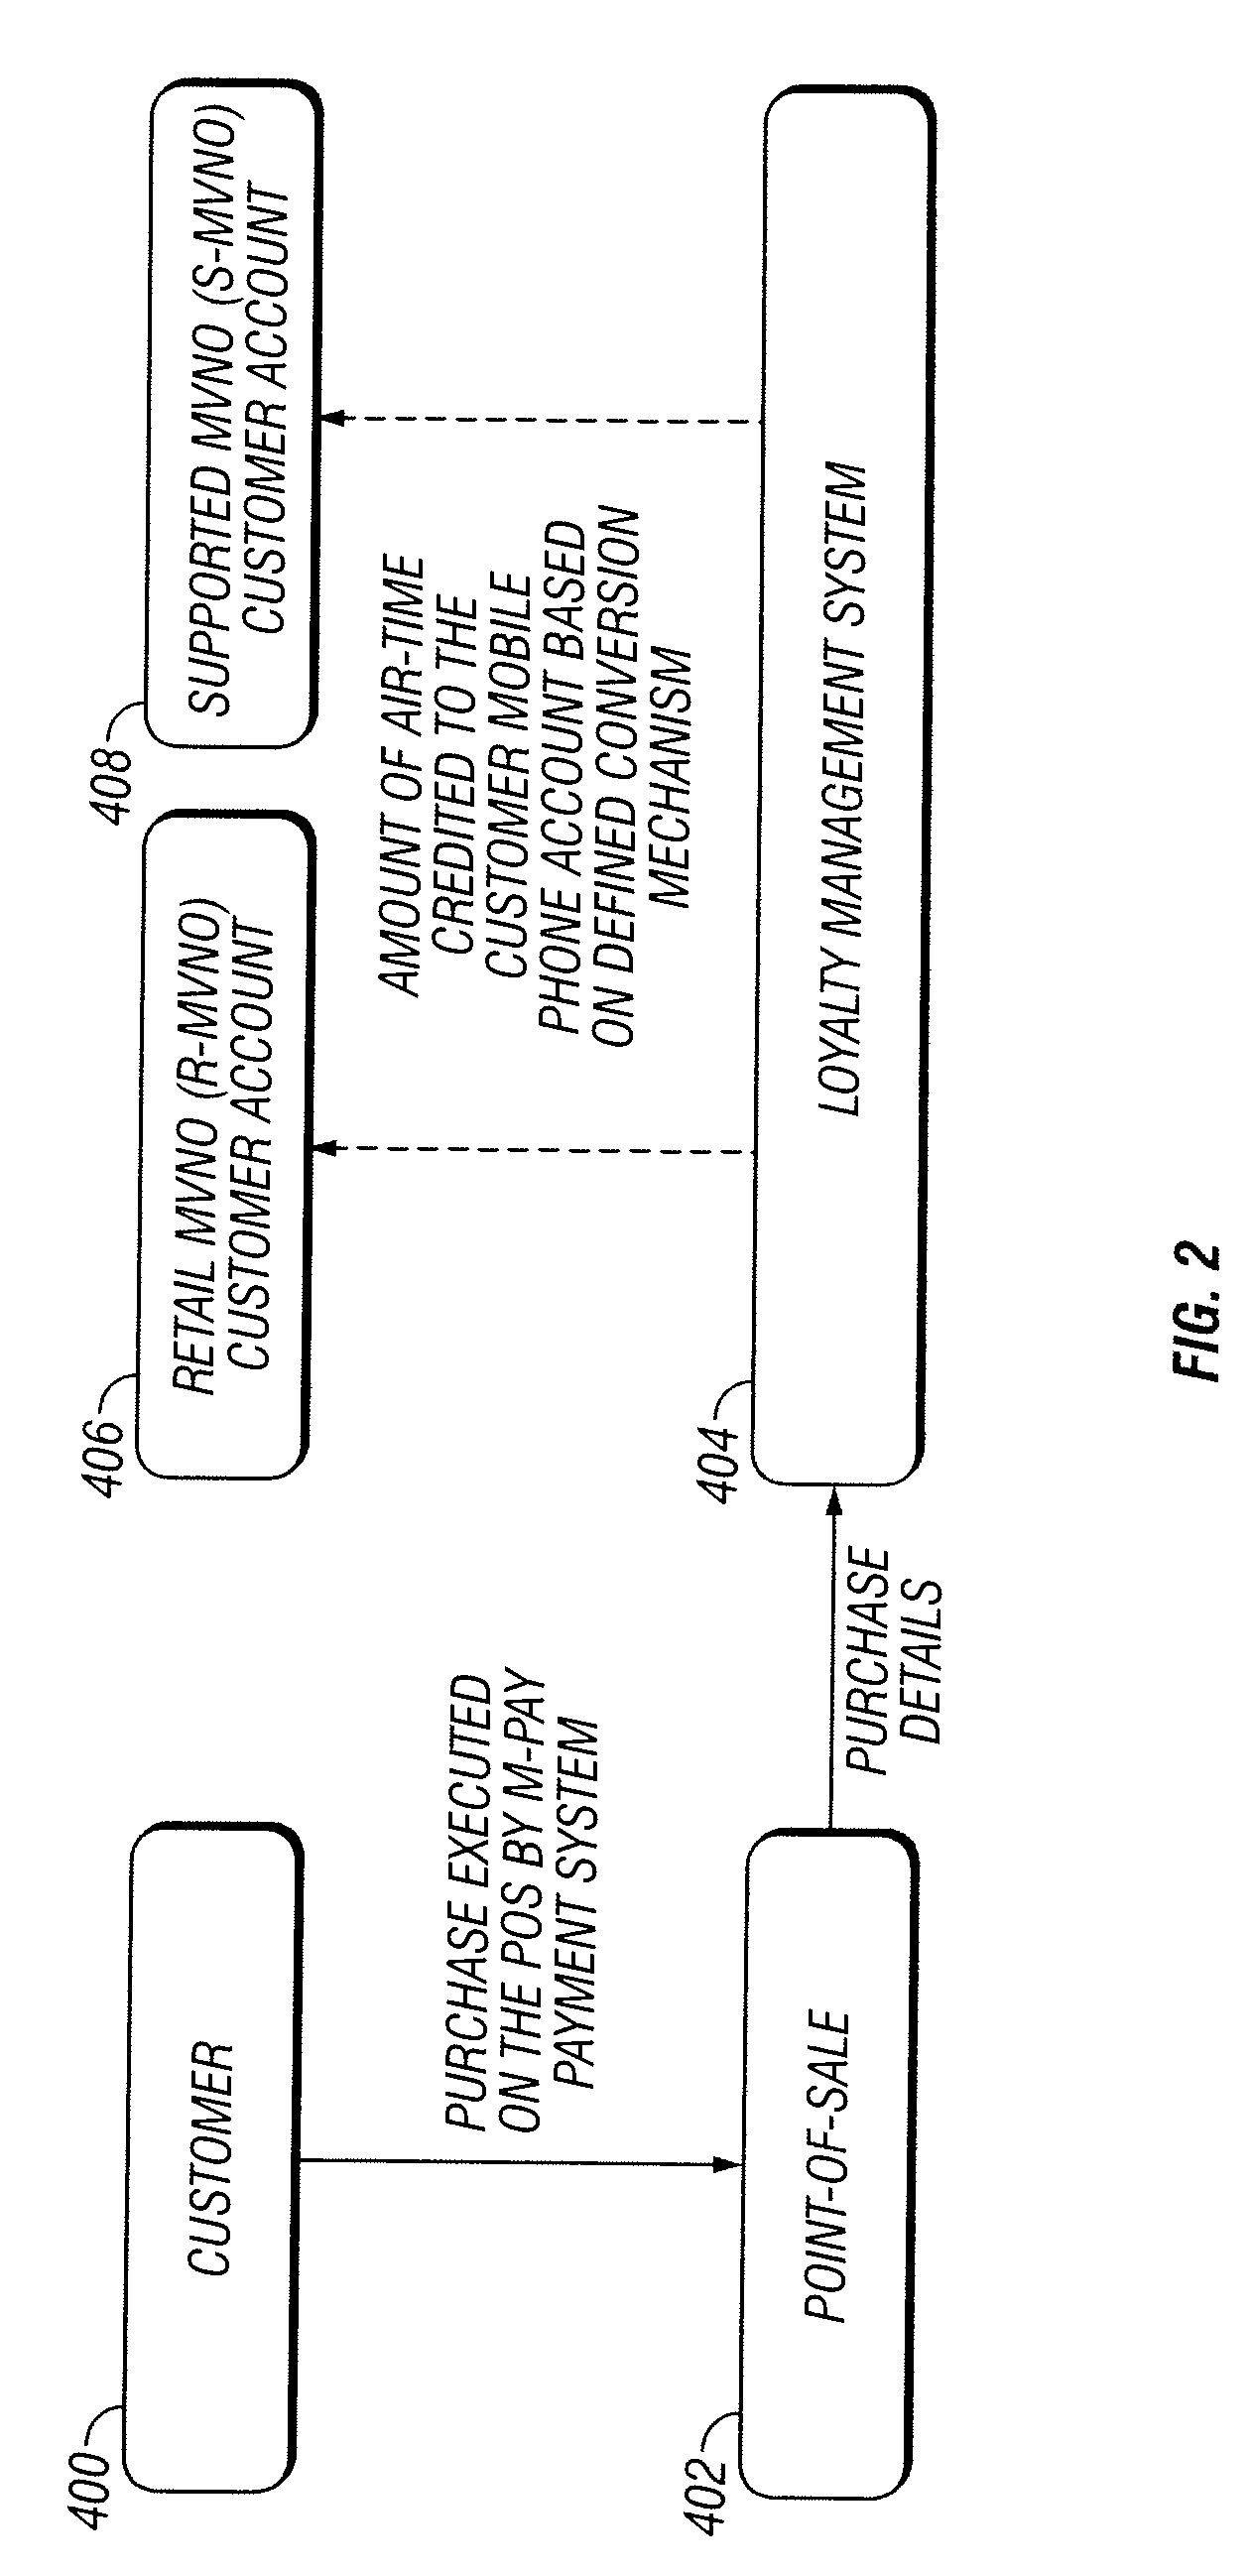 Method and system for collecting, receiving, and transferring transaction information for use by a bonus or loyalty program and electronic vouchers